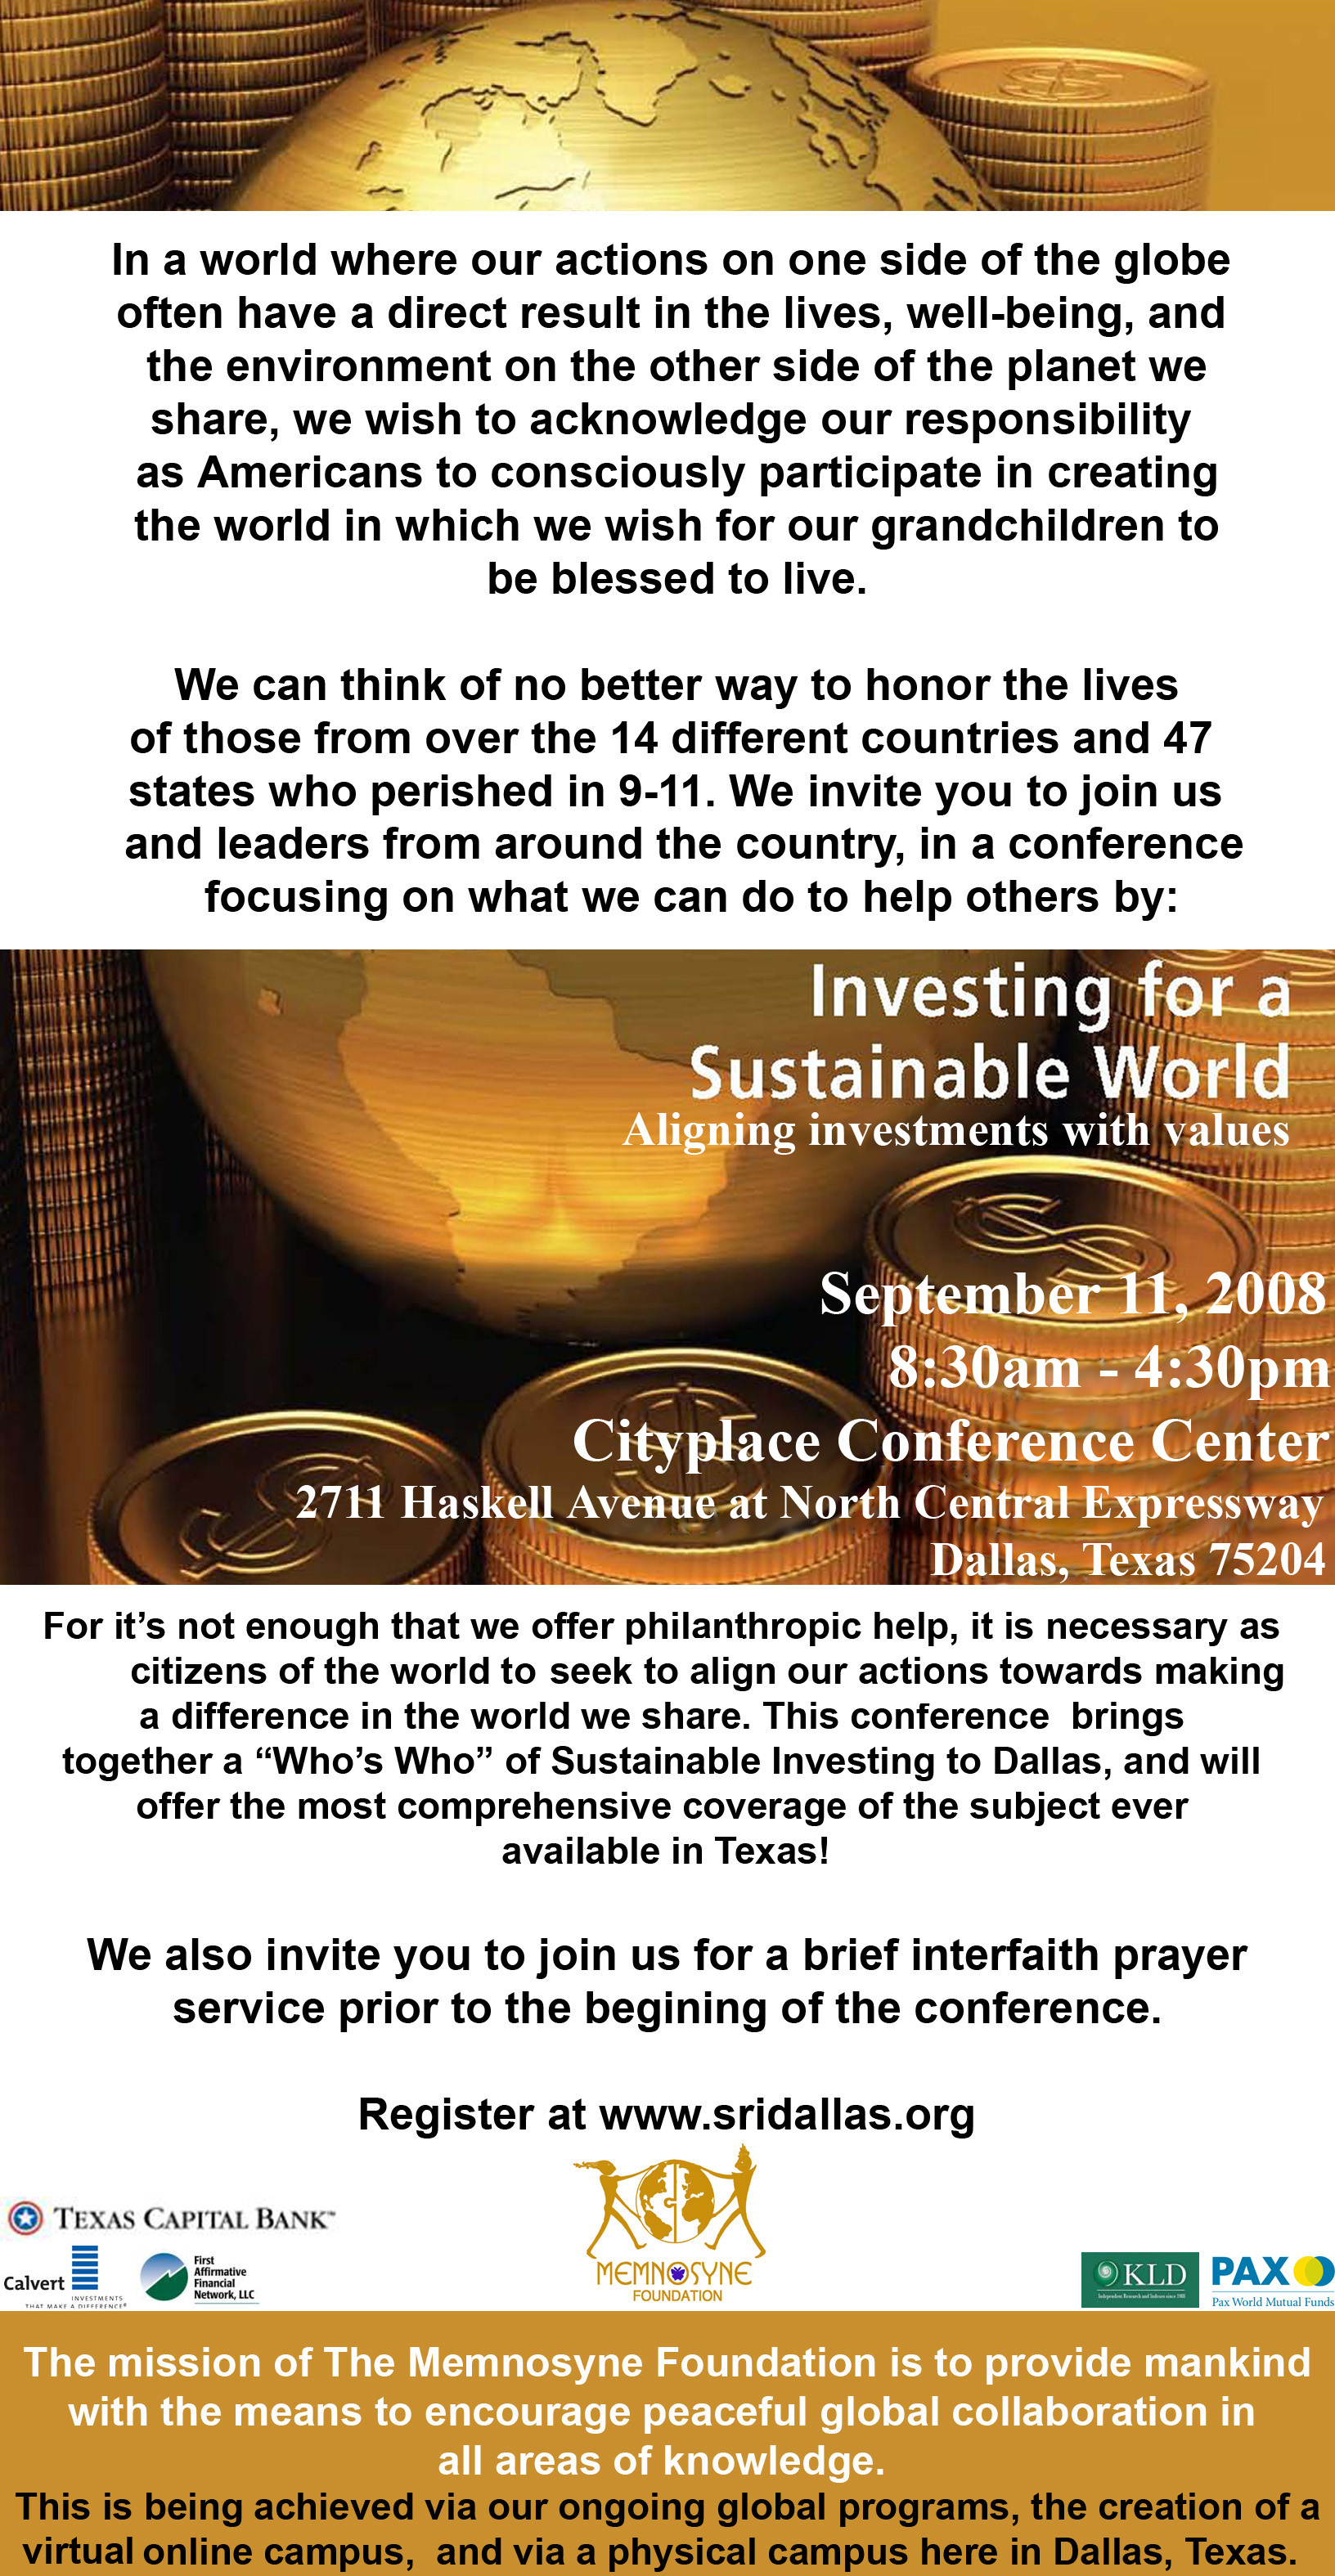 The Memnosyne Foundation Presents: Investing For a Sustainable World: Aligning investments with Values -- This conference brings together a a "Whose Who" of Sustainable Investing to Dallas, and will offer the most comprehensive coverage of the subject ever available in Texas!